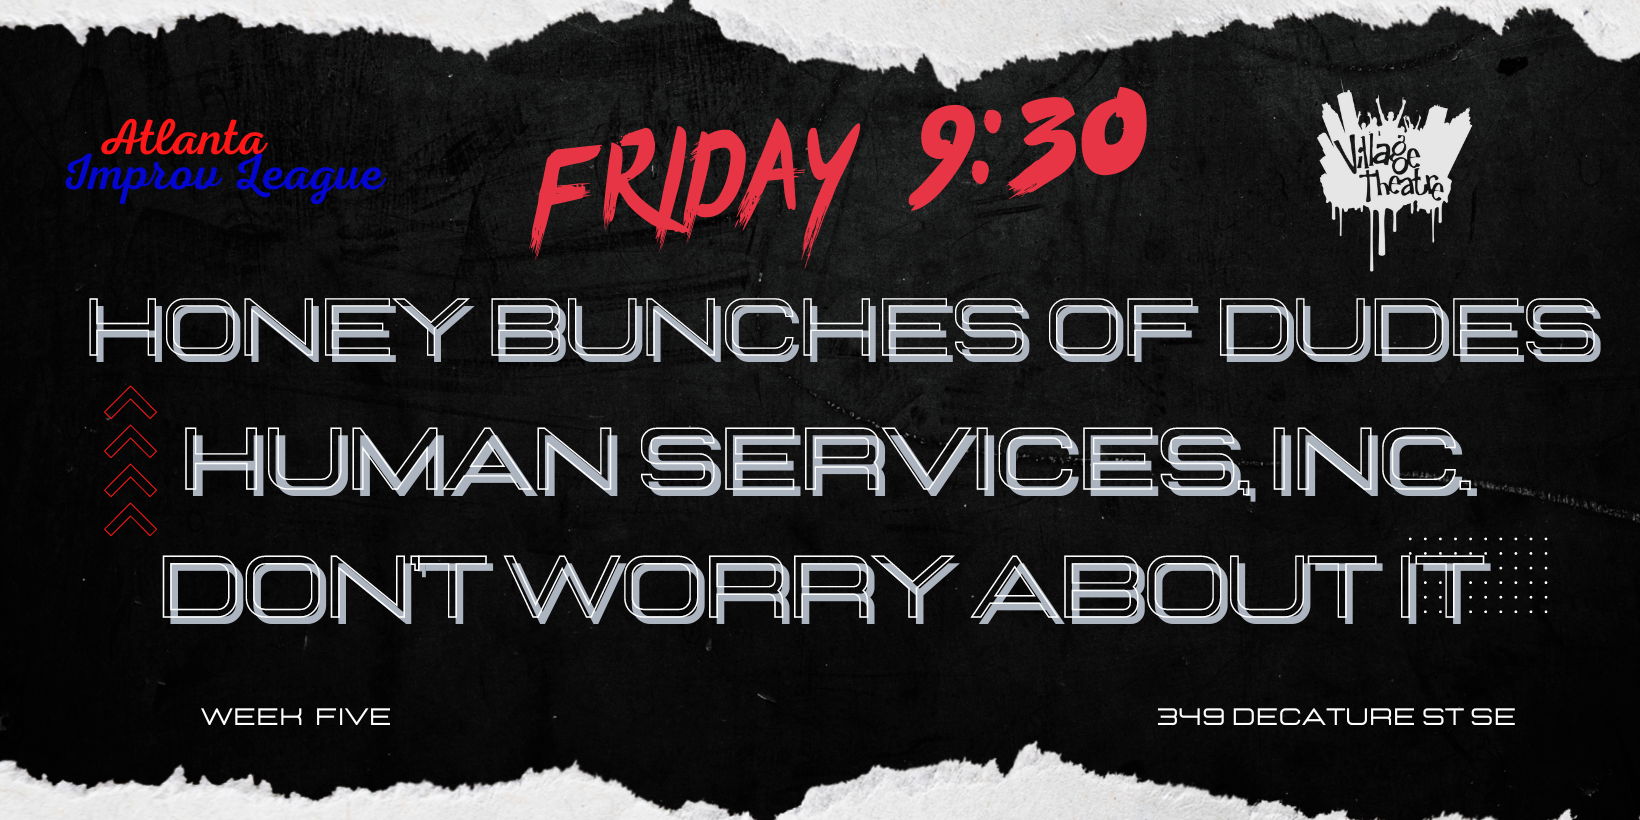 AIL Week 4: Honey Bunches of Dudes; Human Services, Inc; Don't Worry About It promotional image